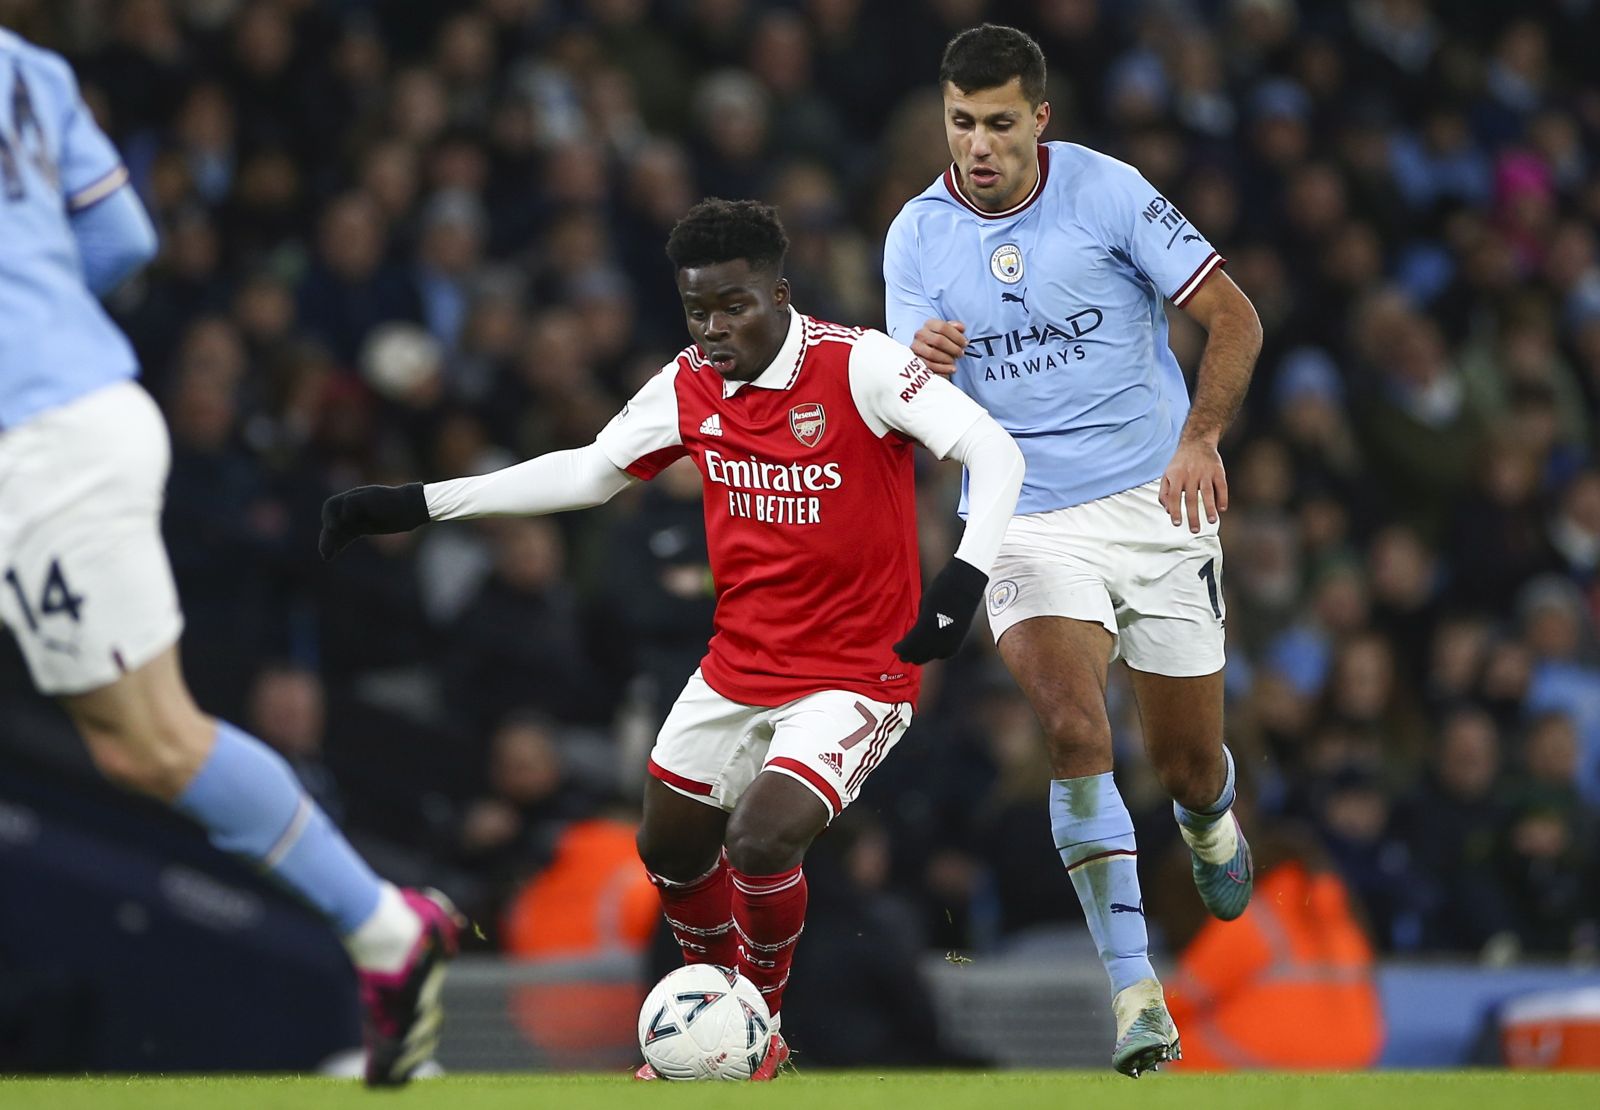 epa10434845  Bukayo Saka (L) of Arsenal in action against Rodri (R) of Manchester City during the 4th round FA Cup soccer match between Manchester City and Arsenal in Manchester, Britain, 27 January 2023.  EPA/ADAM VAUGHAN EDITORIAL USE ONLY. No use with unauthorized audio, video, data, fixture lists, club/league logos or 'live' services. Online in-match use limited to 120 images, no video emulation. No use in betting, games or single club/league/player publications.